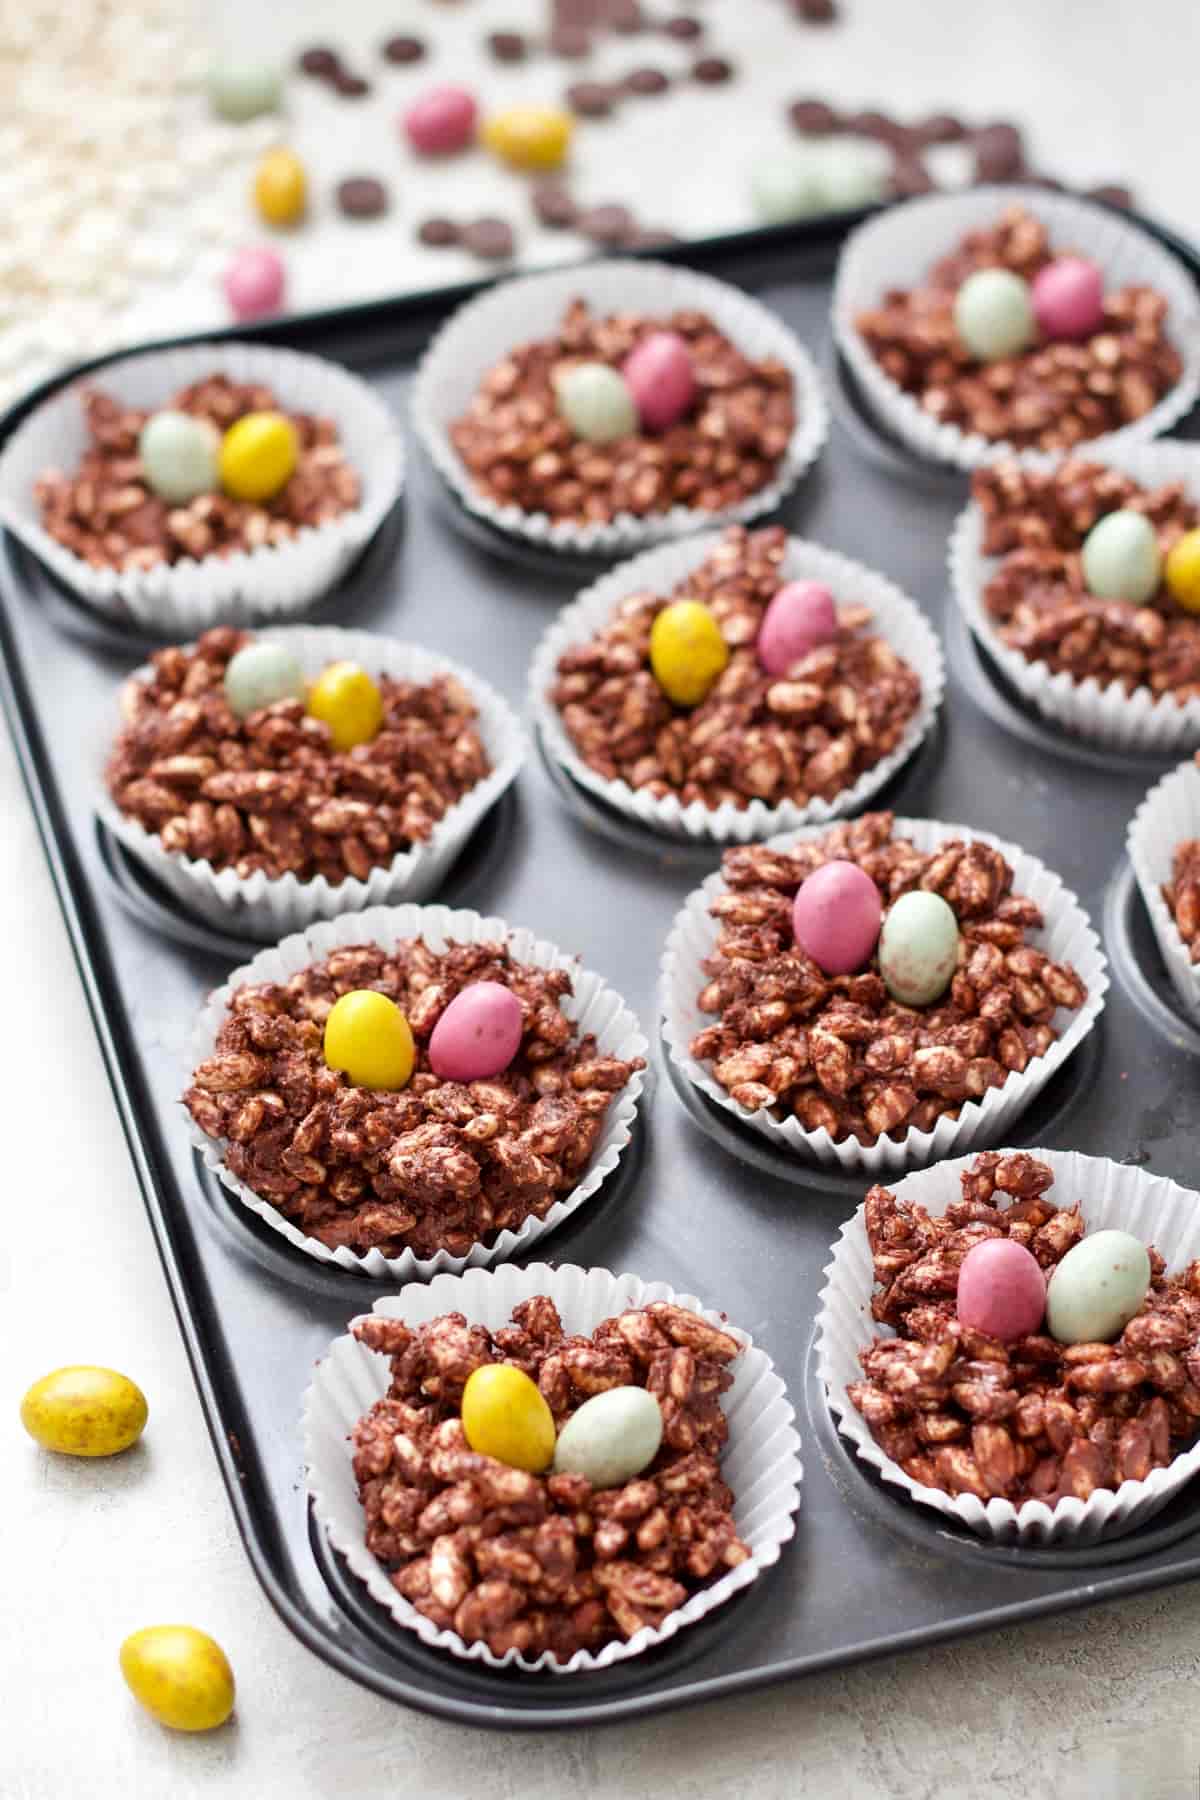 Tray filled with Easter Chocolate Nests topped with Mini Eggs.